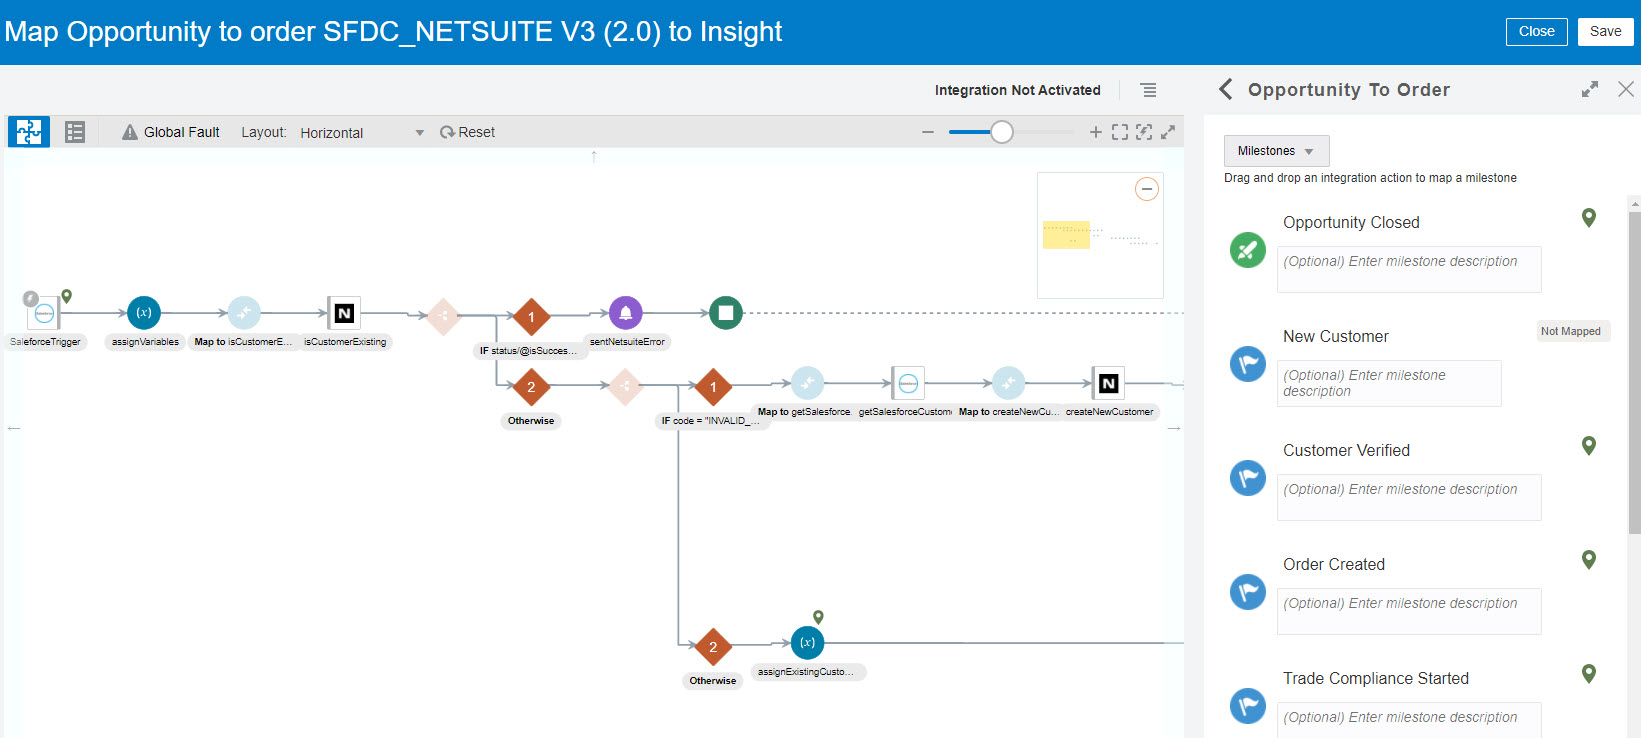 The Insight Designer in the Integrations feature